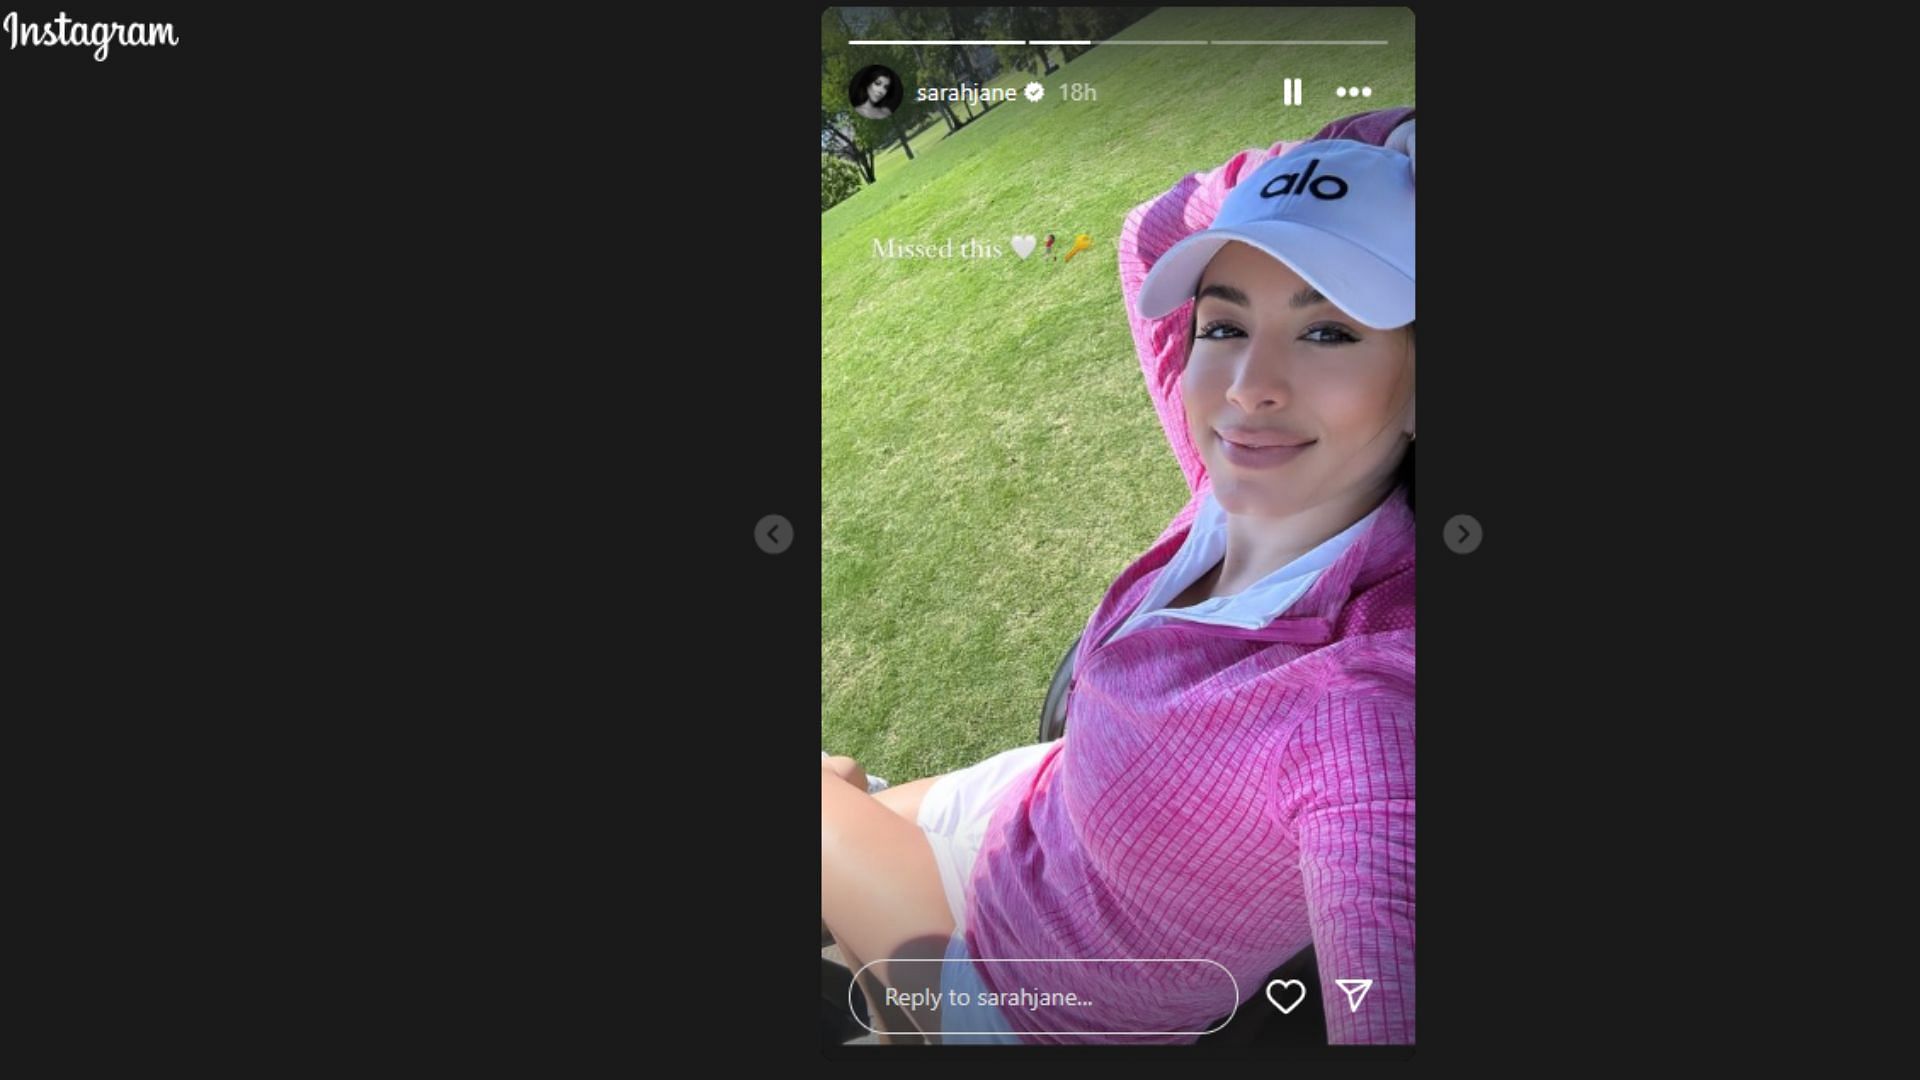 Sarah Jane Ramos expressed her joy at being back on the golf course.